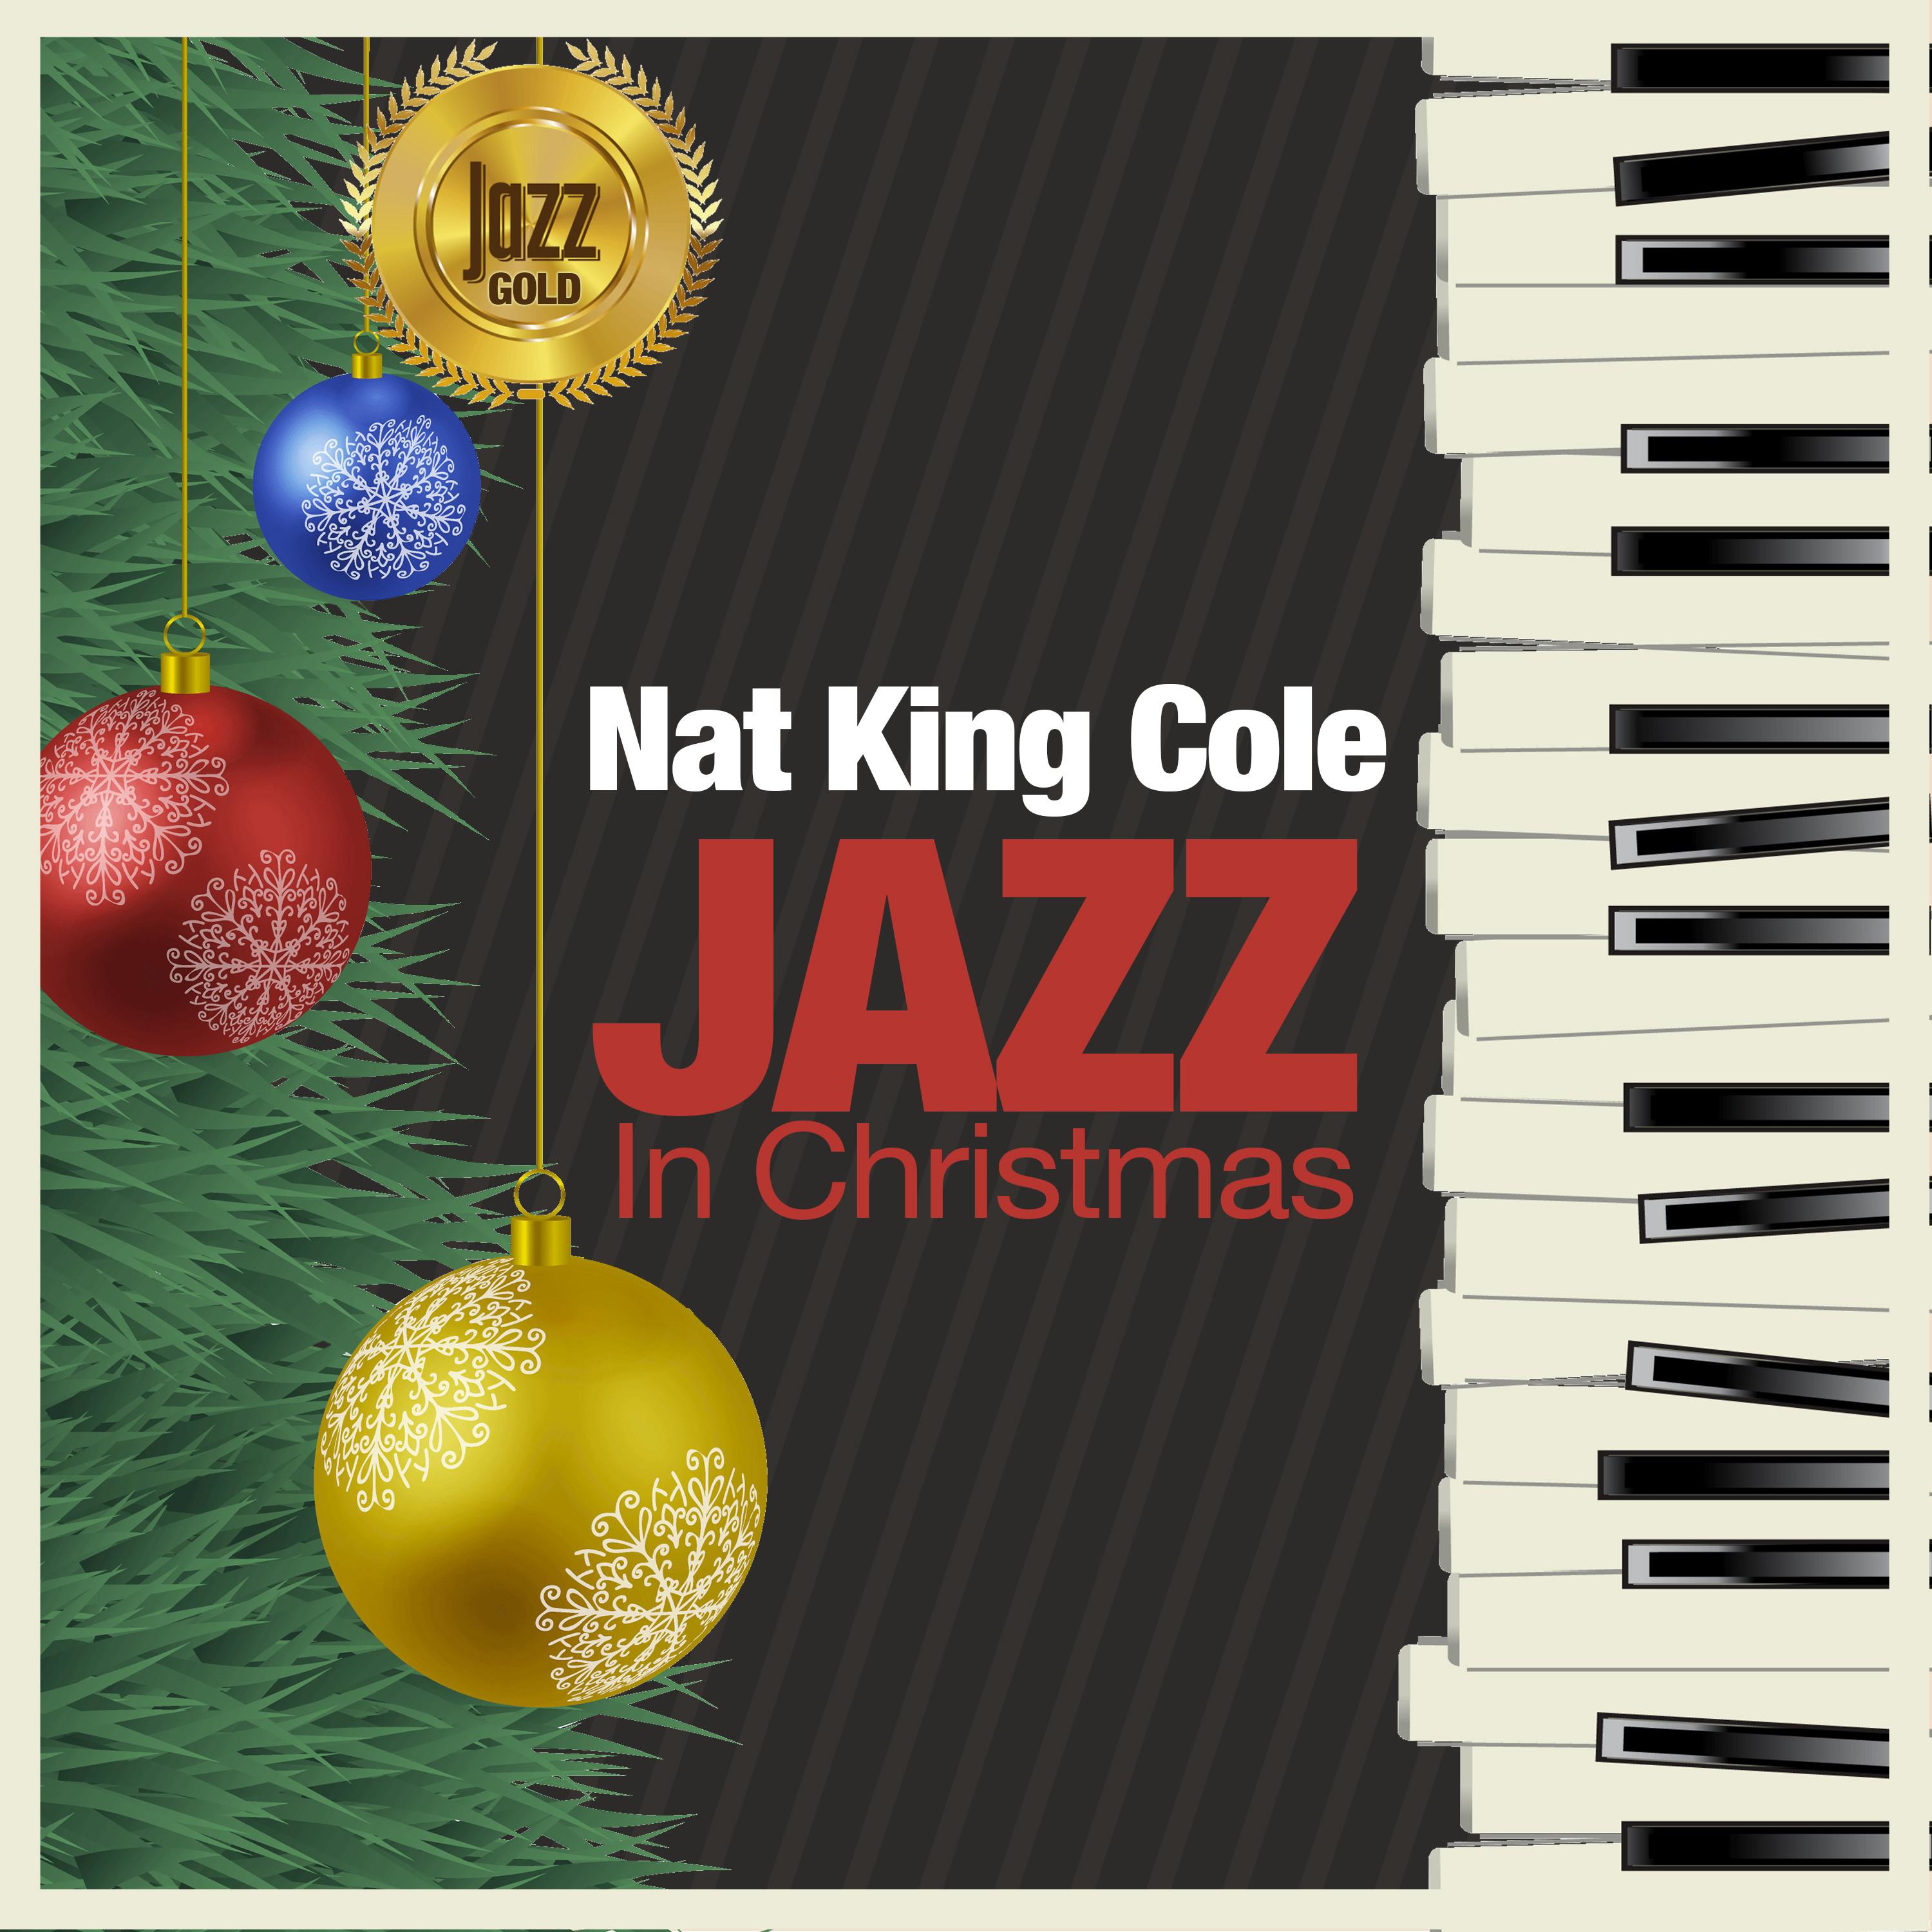 Jazz in Christmas